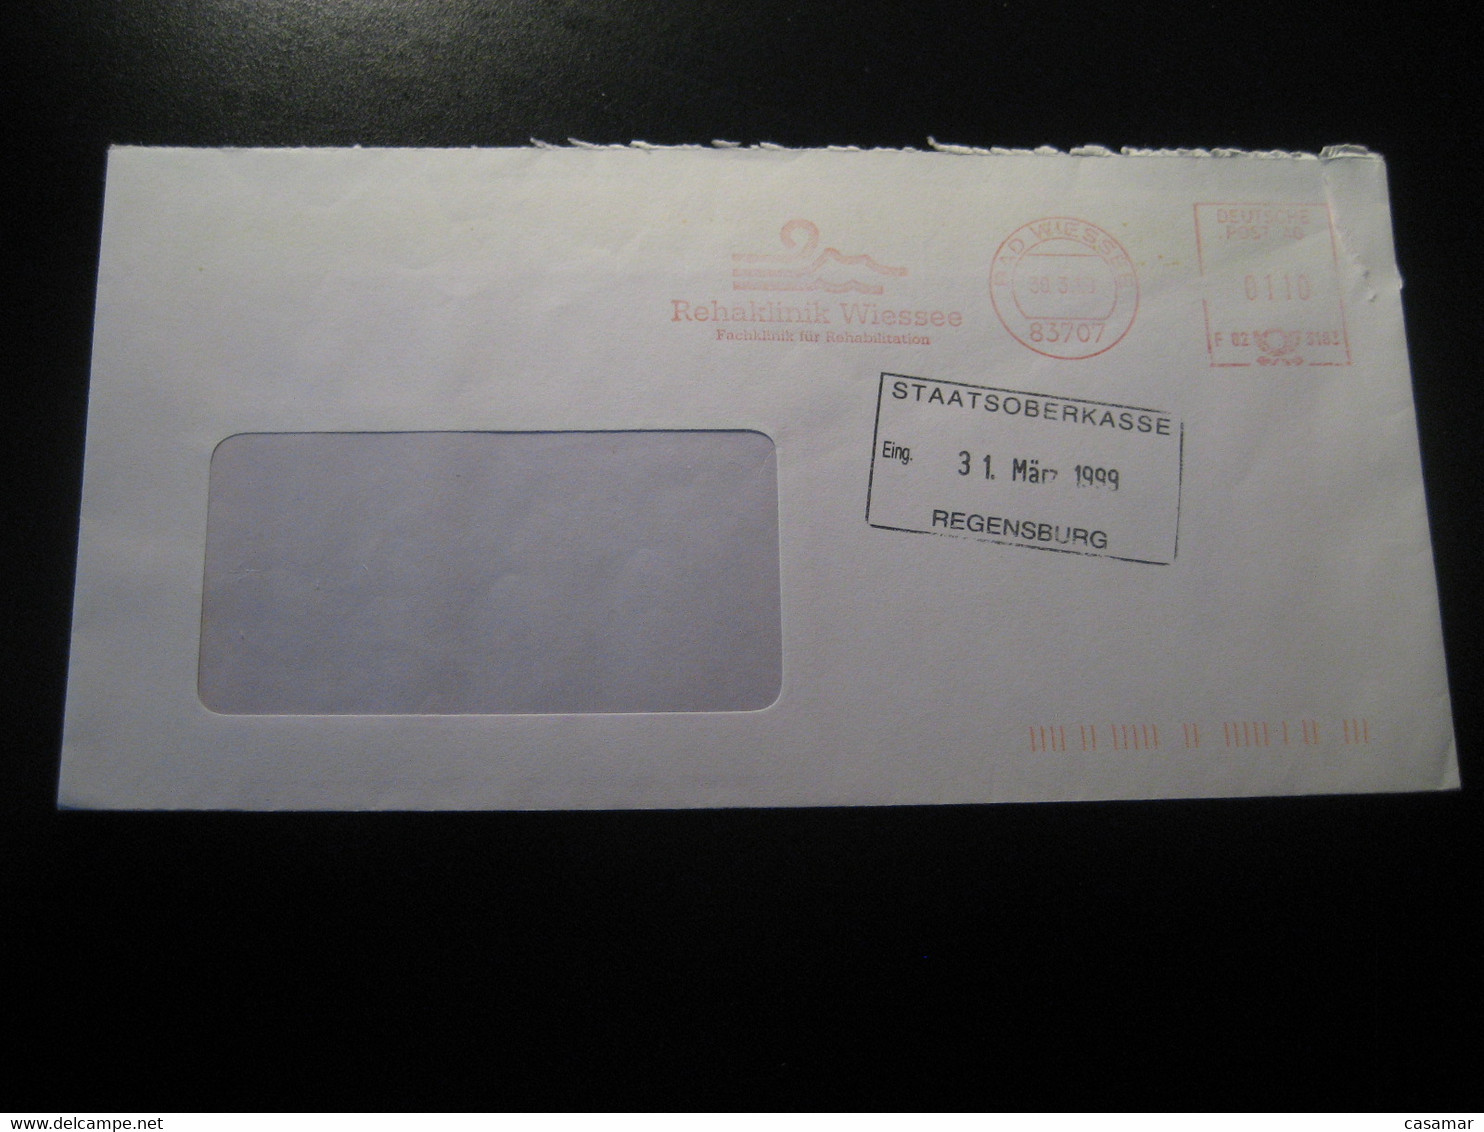 BAD WIESSEE 1999 Rehabilitation Klinik Clinic Hospital Clinique Thermal Health Meter Mail Cancel Cover GERMANY - Bäderwesen